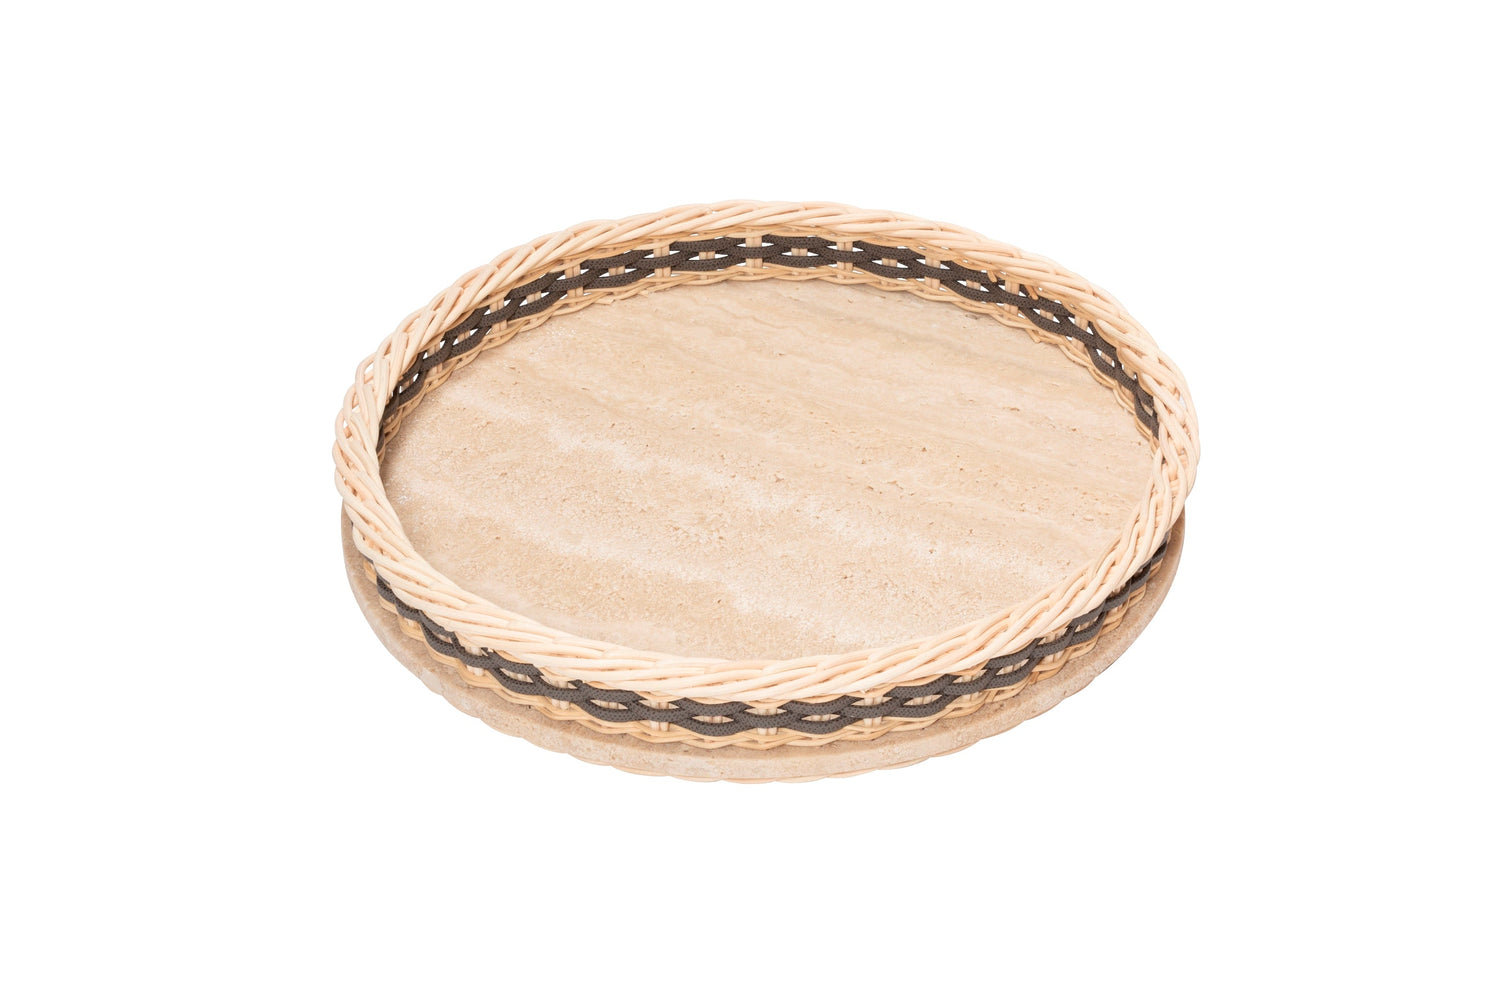 Pigment France Orsay Round Travertine Tray | Luxury Home Accessories, Elegant Serving Trays & Gift Items | 2Jour Concierge, #1 luxury high-end gift & lifestyle shop